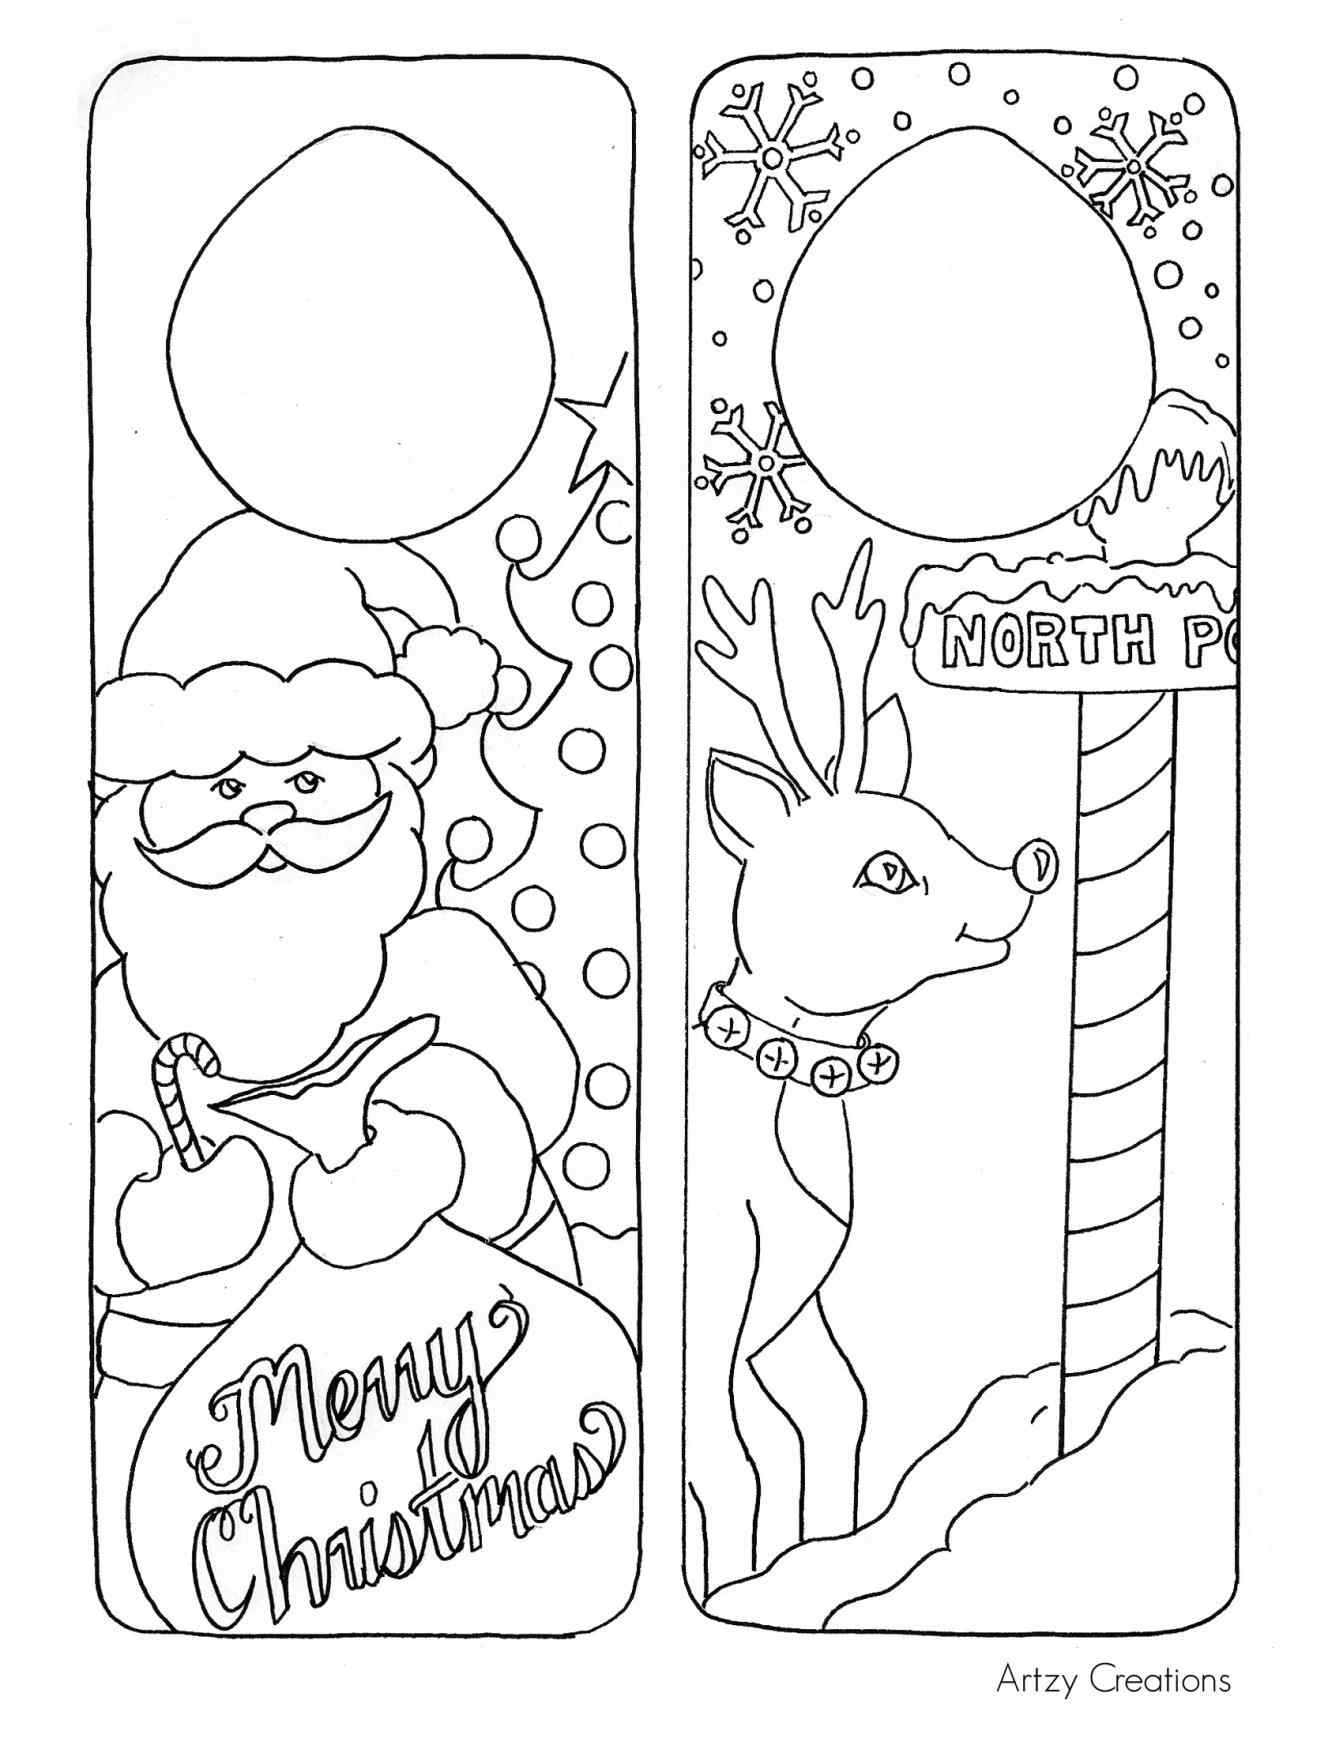 Community Coloring Pages at GetColorings.com | Free printable colorings